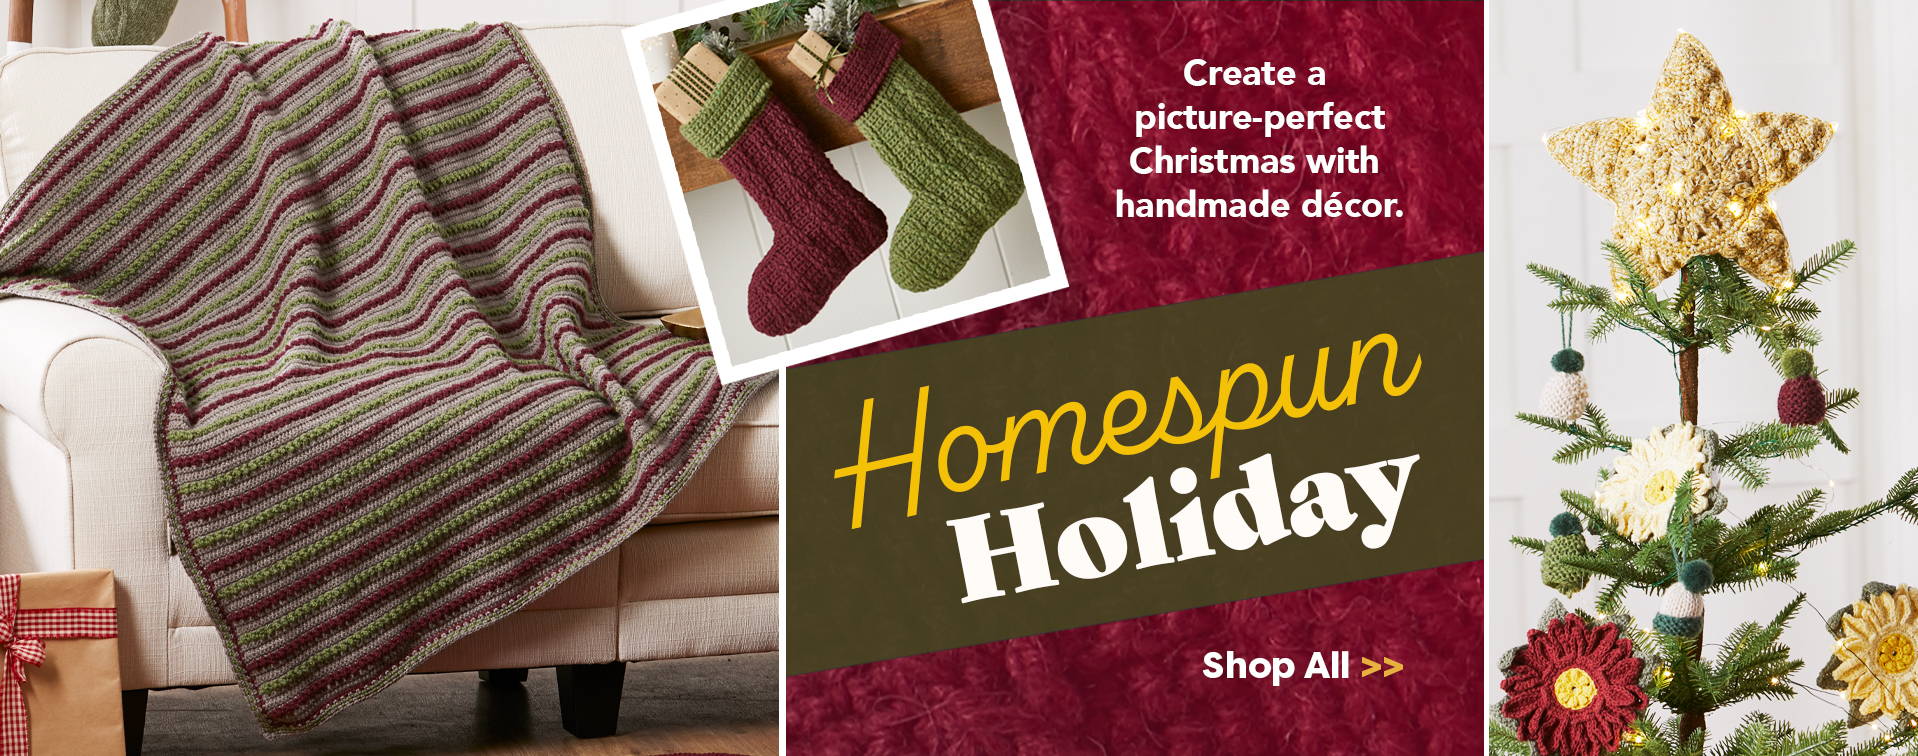 Create a picture-perfect Christmas with handmade decor. Shop Knit and Crochet Kits.